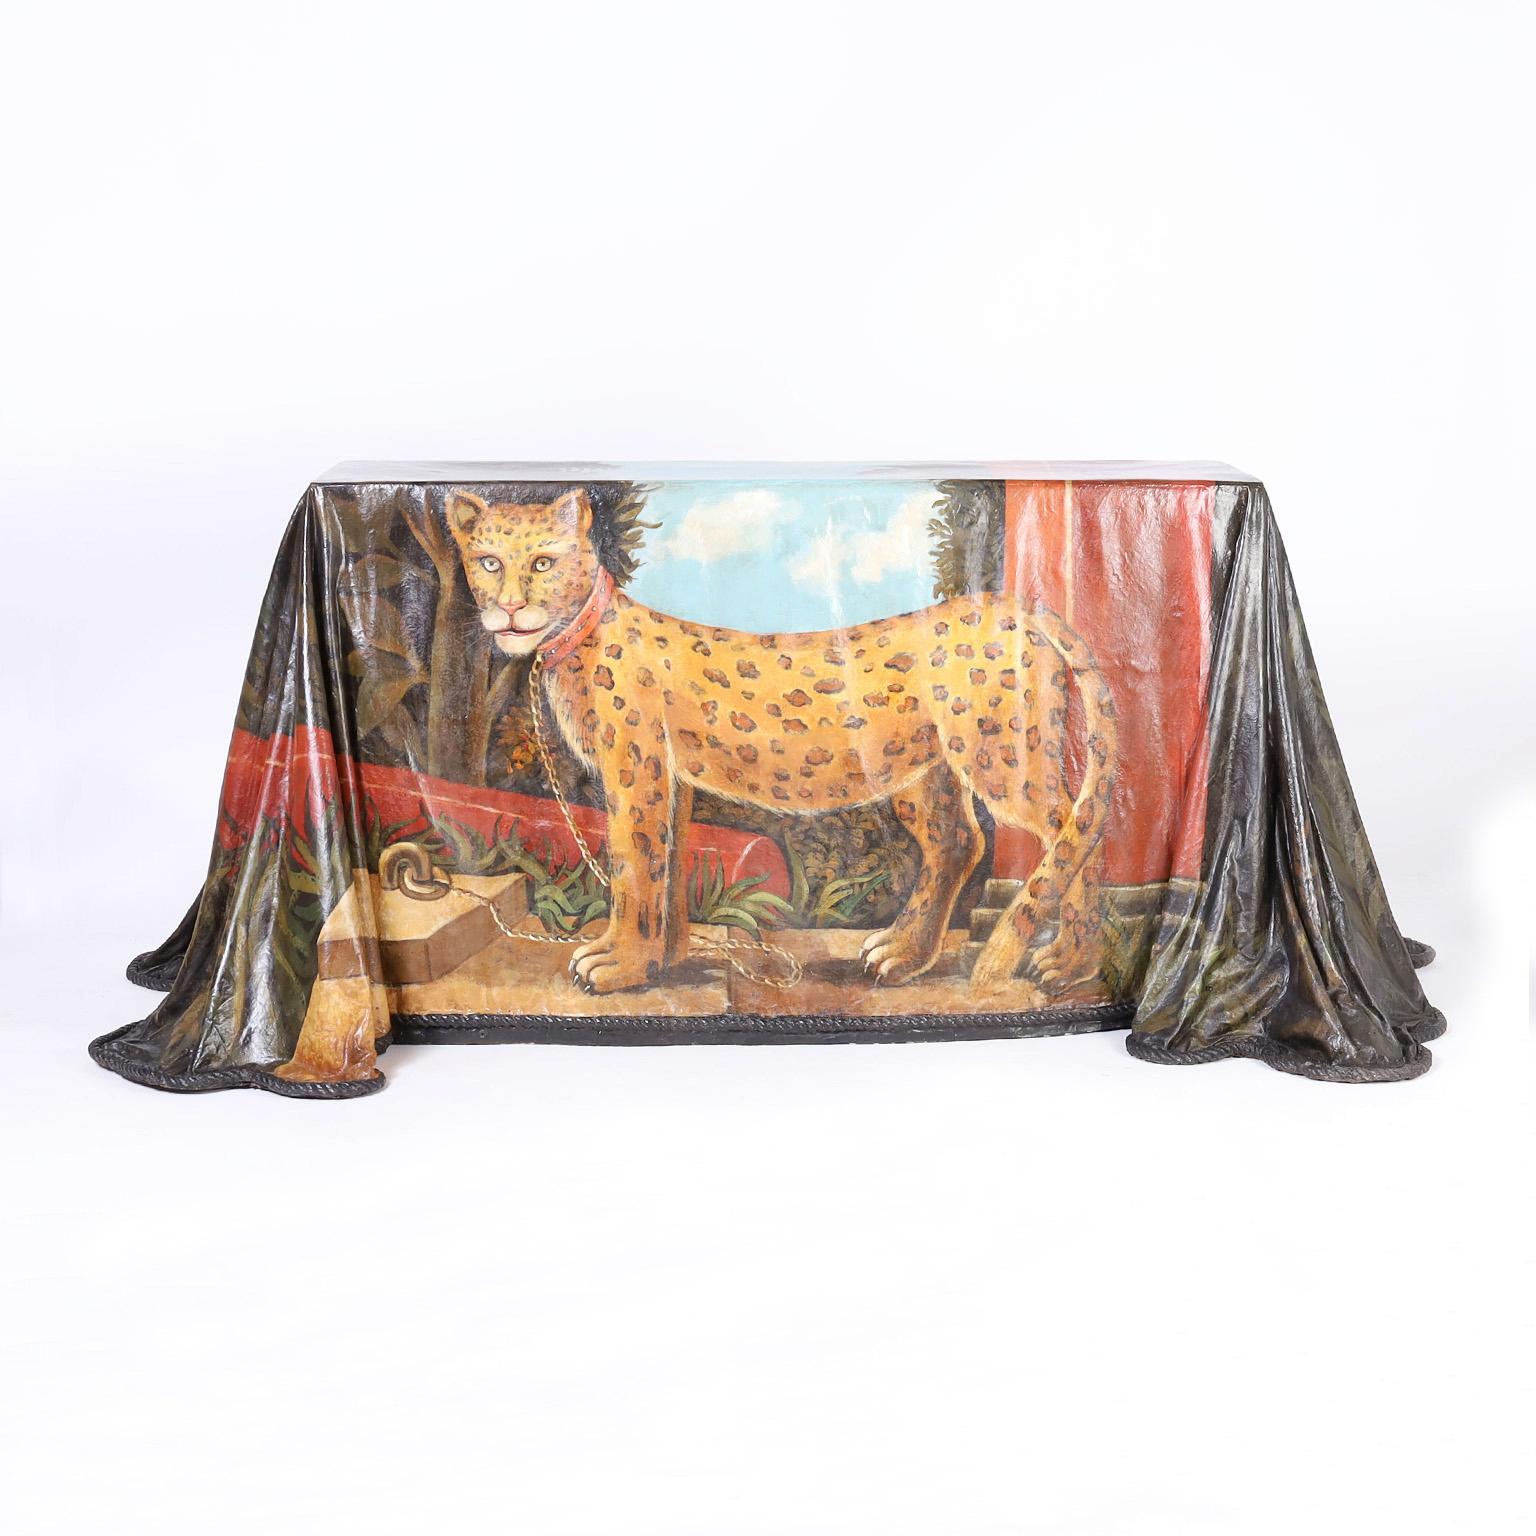 Mid century ghost drapery console table crafted in fiberglass and hand painted with a pet leopard in a tongue in cheek classical woodland setting, signed Baxter in a fold.